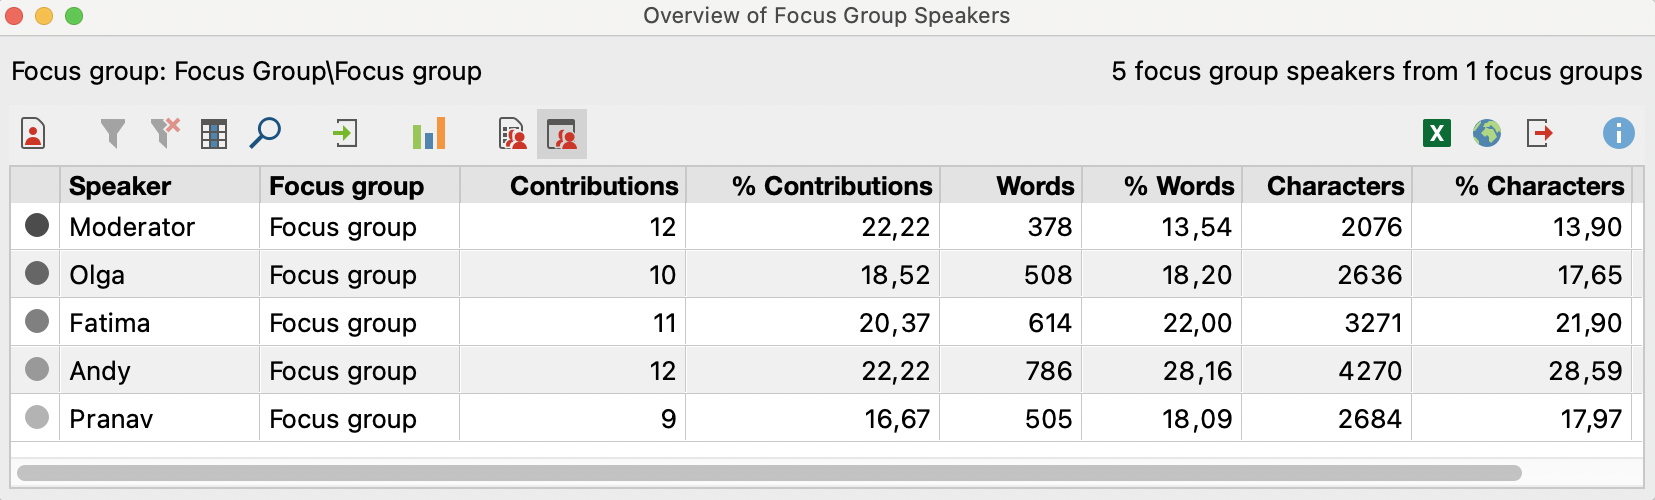 The “Overview of Focus Group Speakers” provides important information